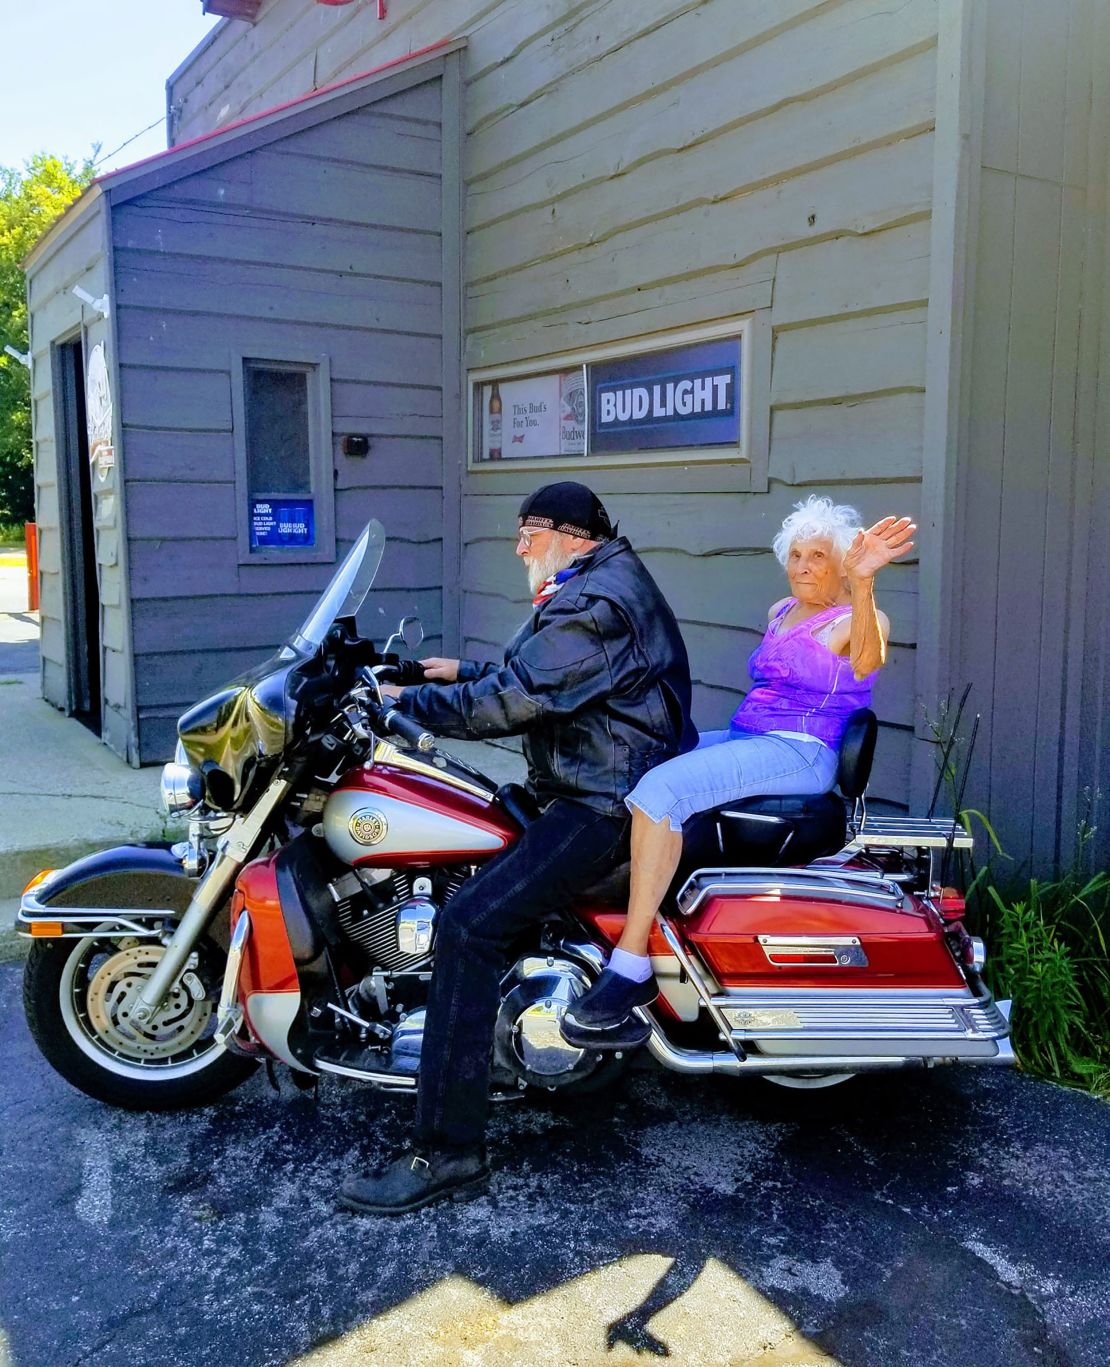 Pollack on her first motorcycle ride.